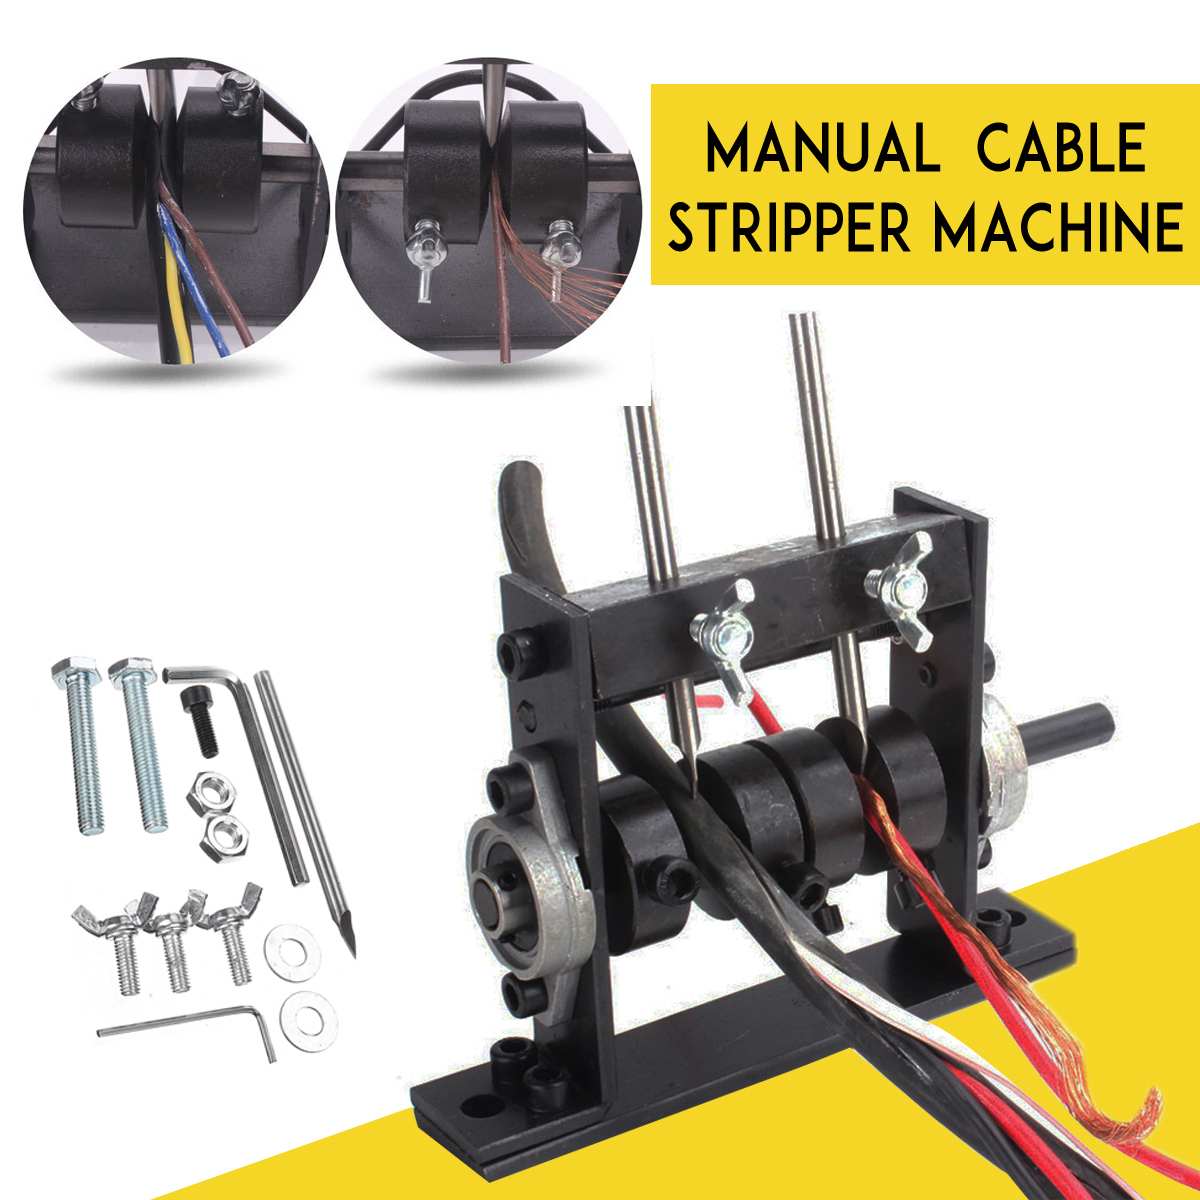 Manual Wire Cable Stripping Peeling Machine Cable Scrap Recycle Tool Copper Wire Stripper For 1-30mm Wire with 2x Steel Cutter